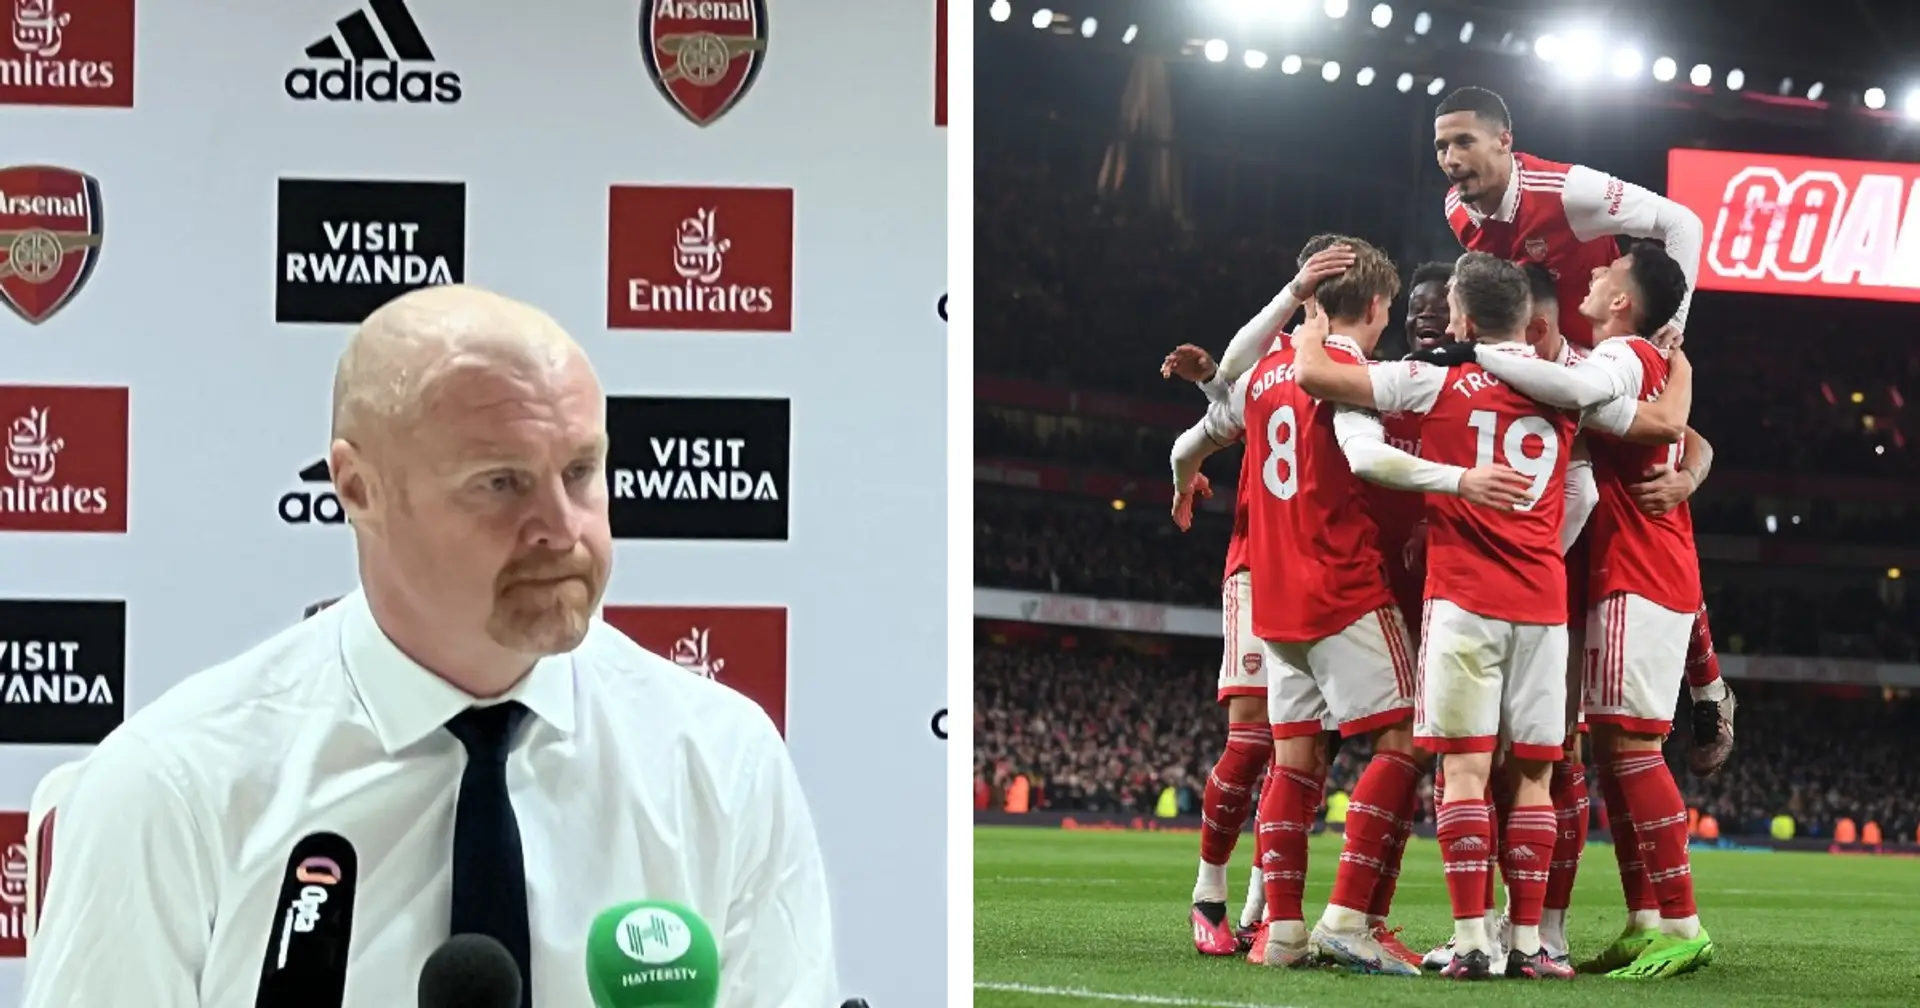 'They're top for a reason': Everton manager Dyche humbled by Arsenal defeat